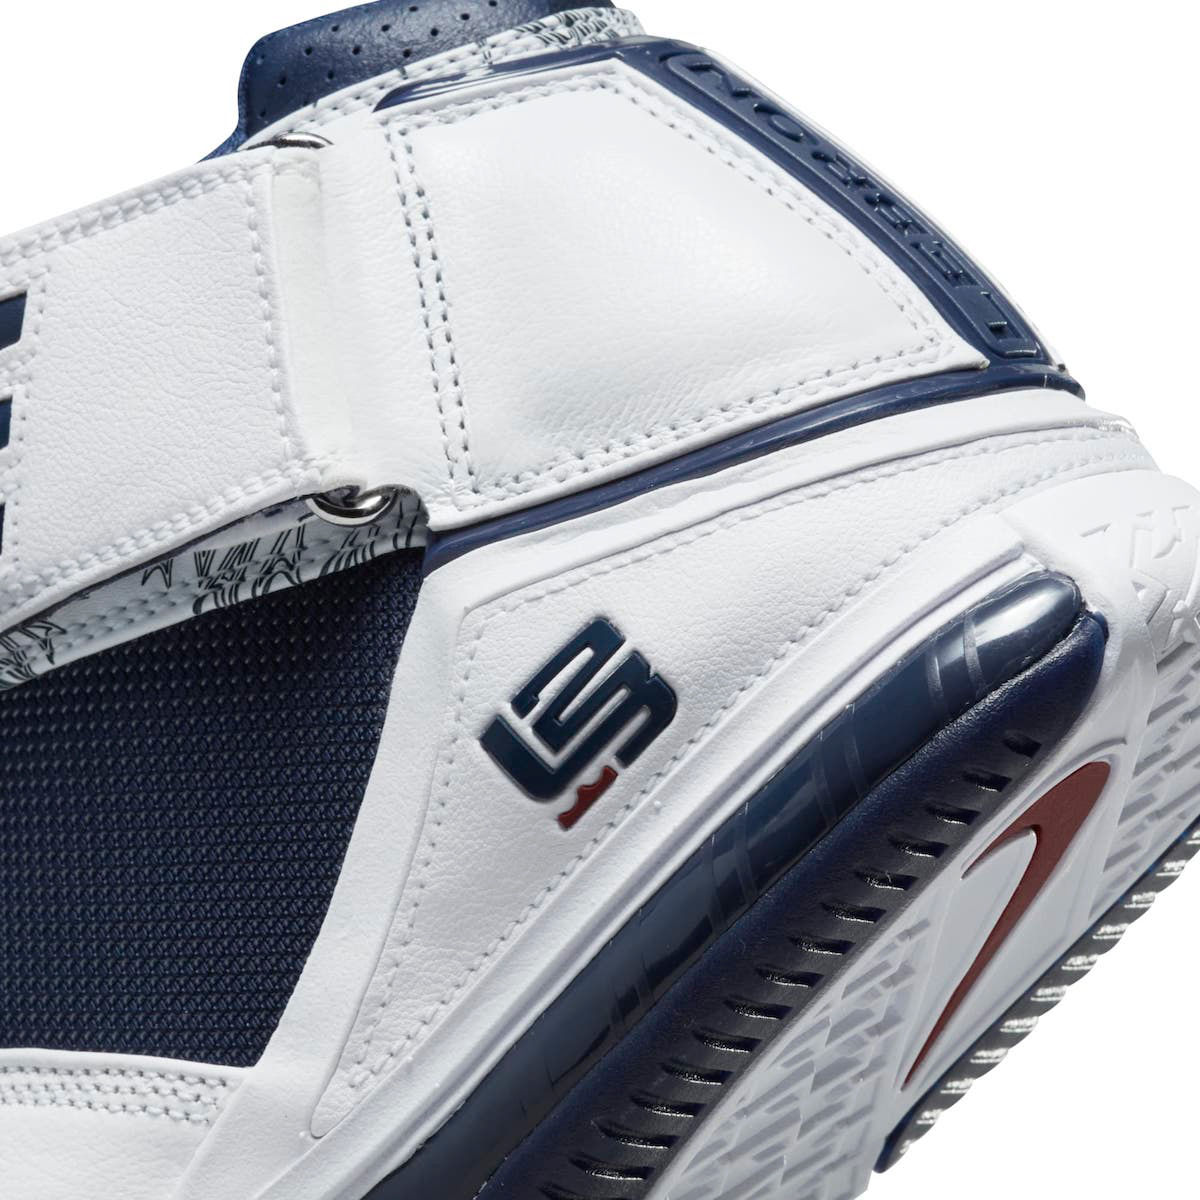 Nike-LeBron-2-USA-Midnight-Navy-Release-Date-9